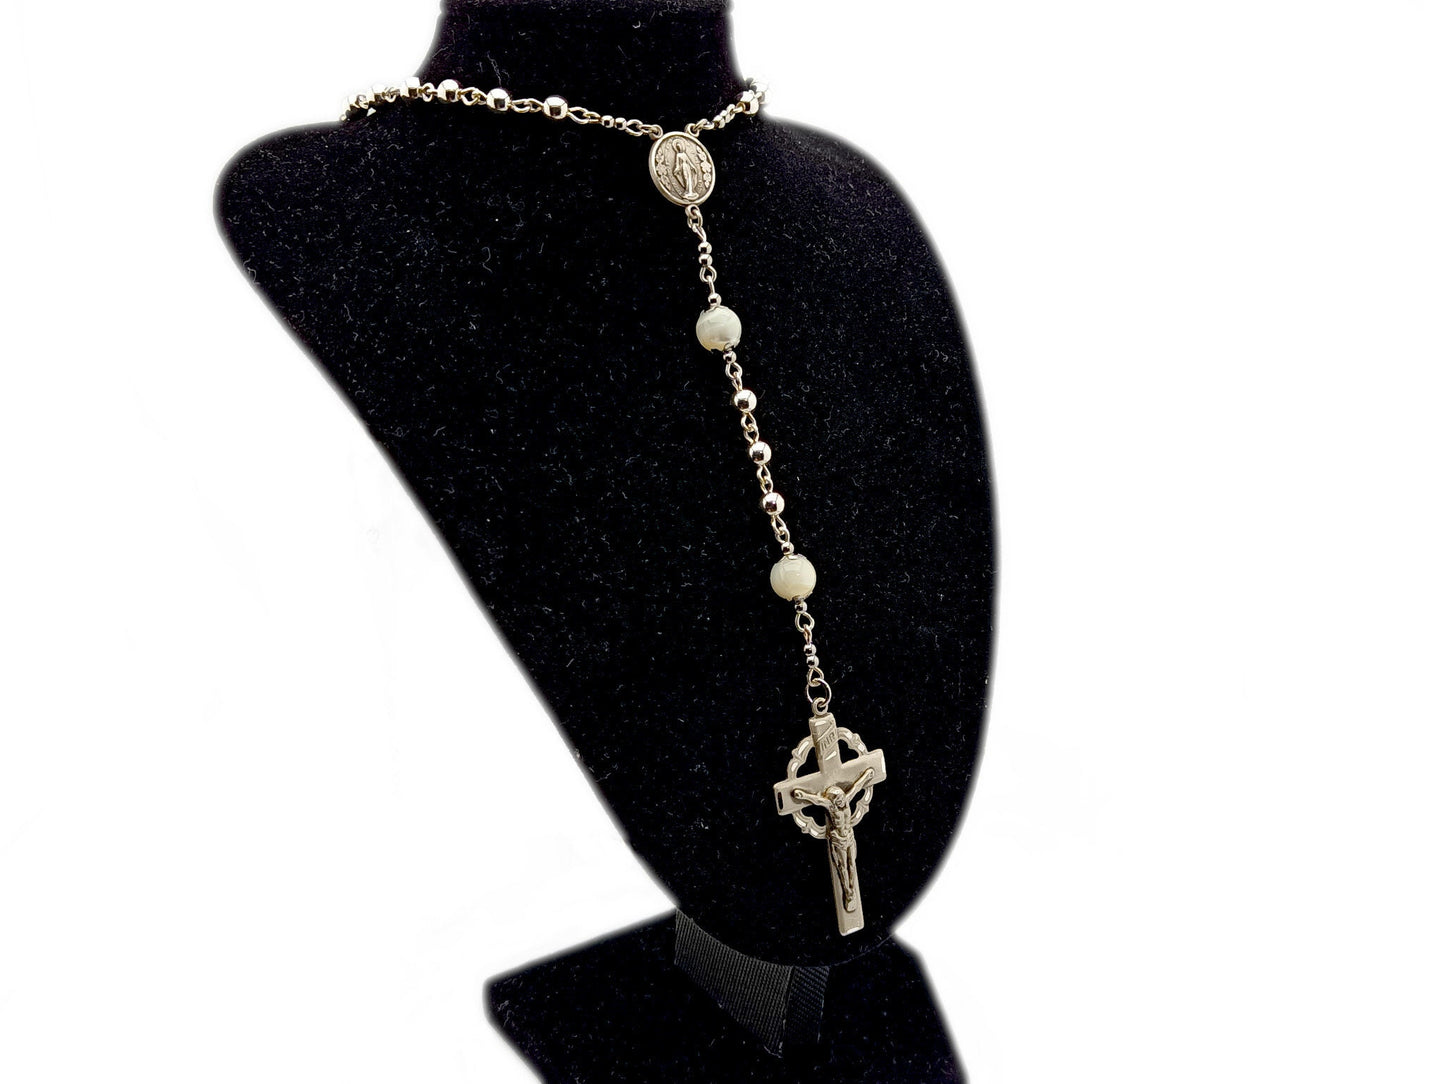 Miraculous Medal unique rosary beads genuine 925 sterling silver rosary with mother of pearl pater beads, 925 silver crucifix and centre medal.